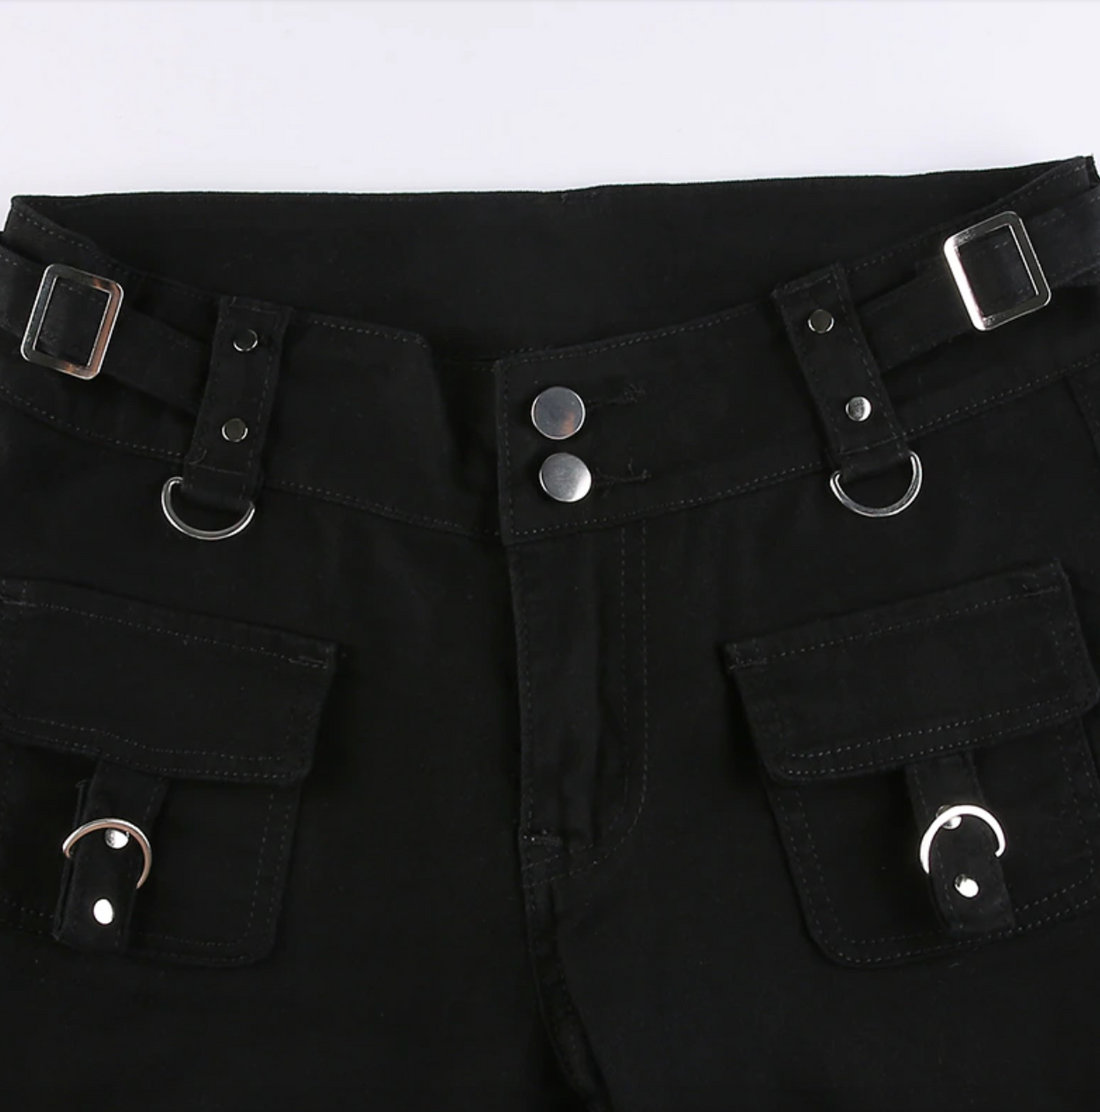 Women's Spring/Autumn Punk Gothic Low Waist Pants with Rivets